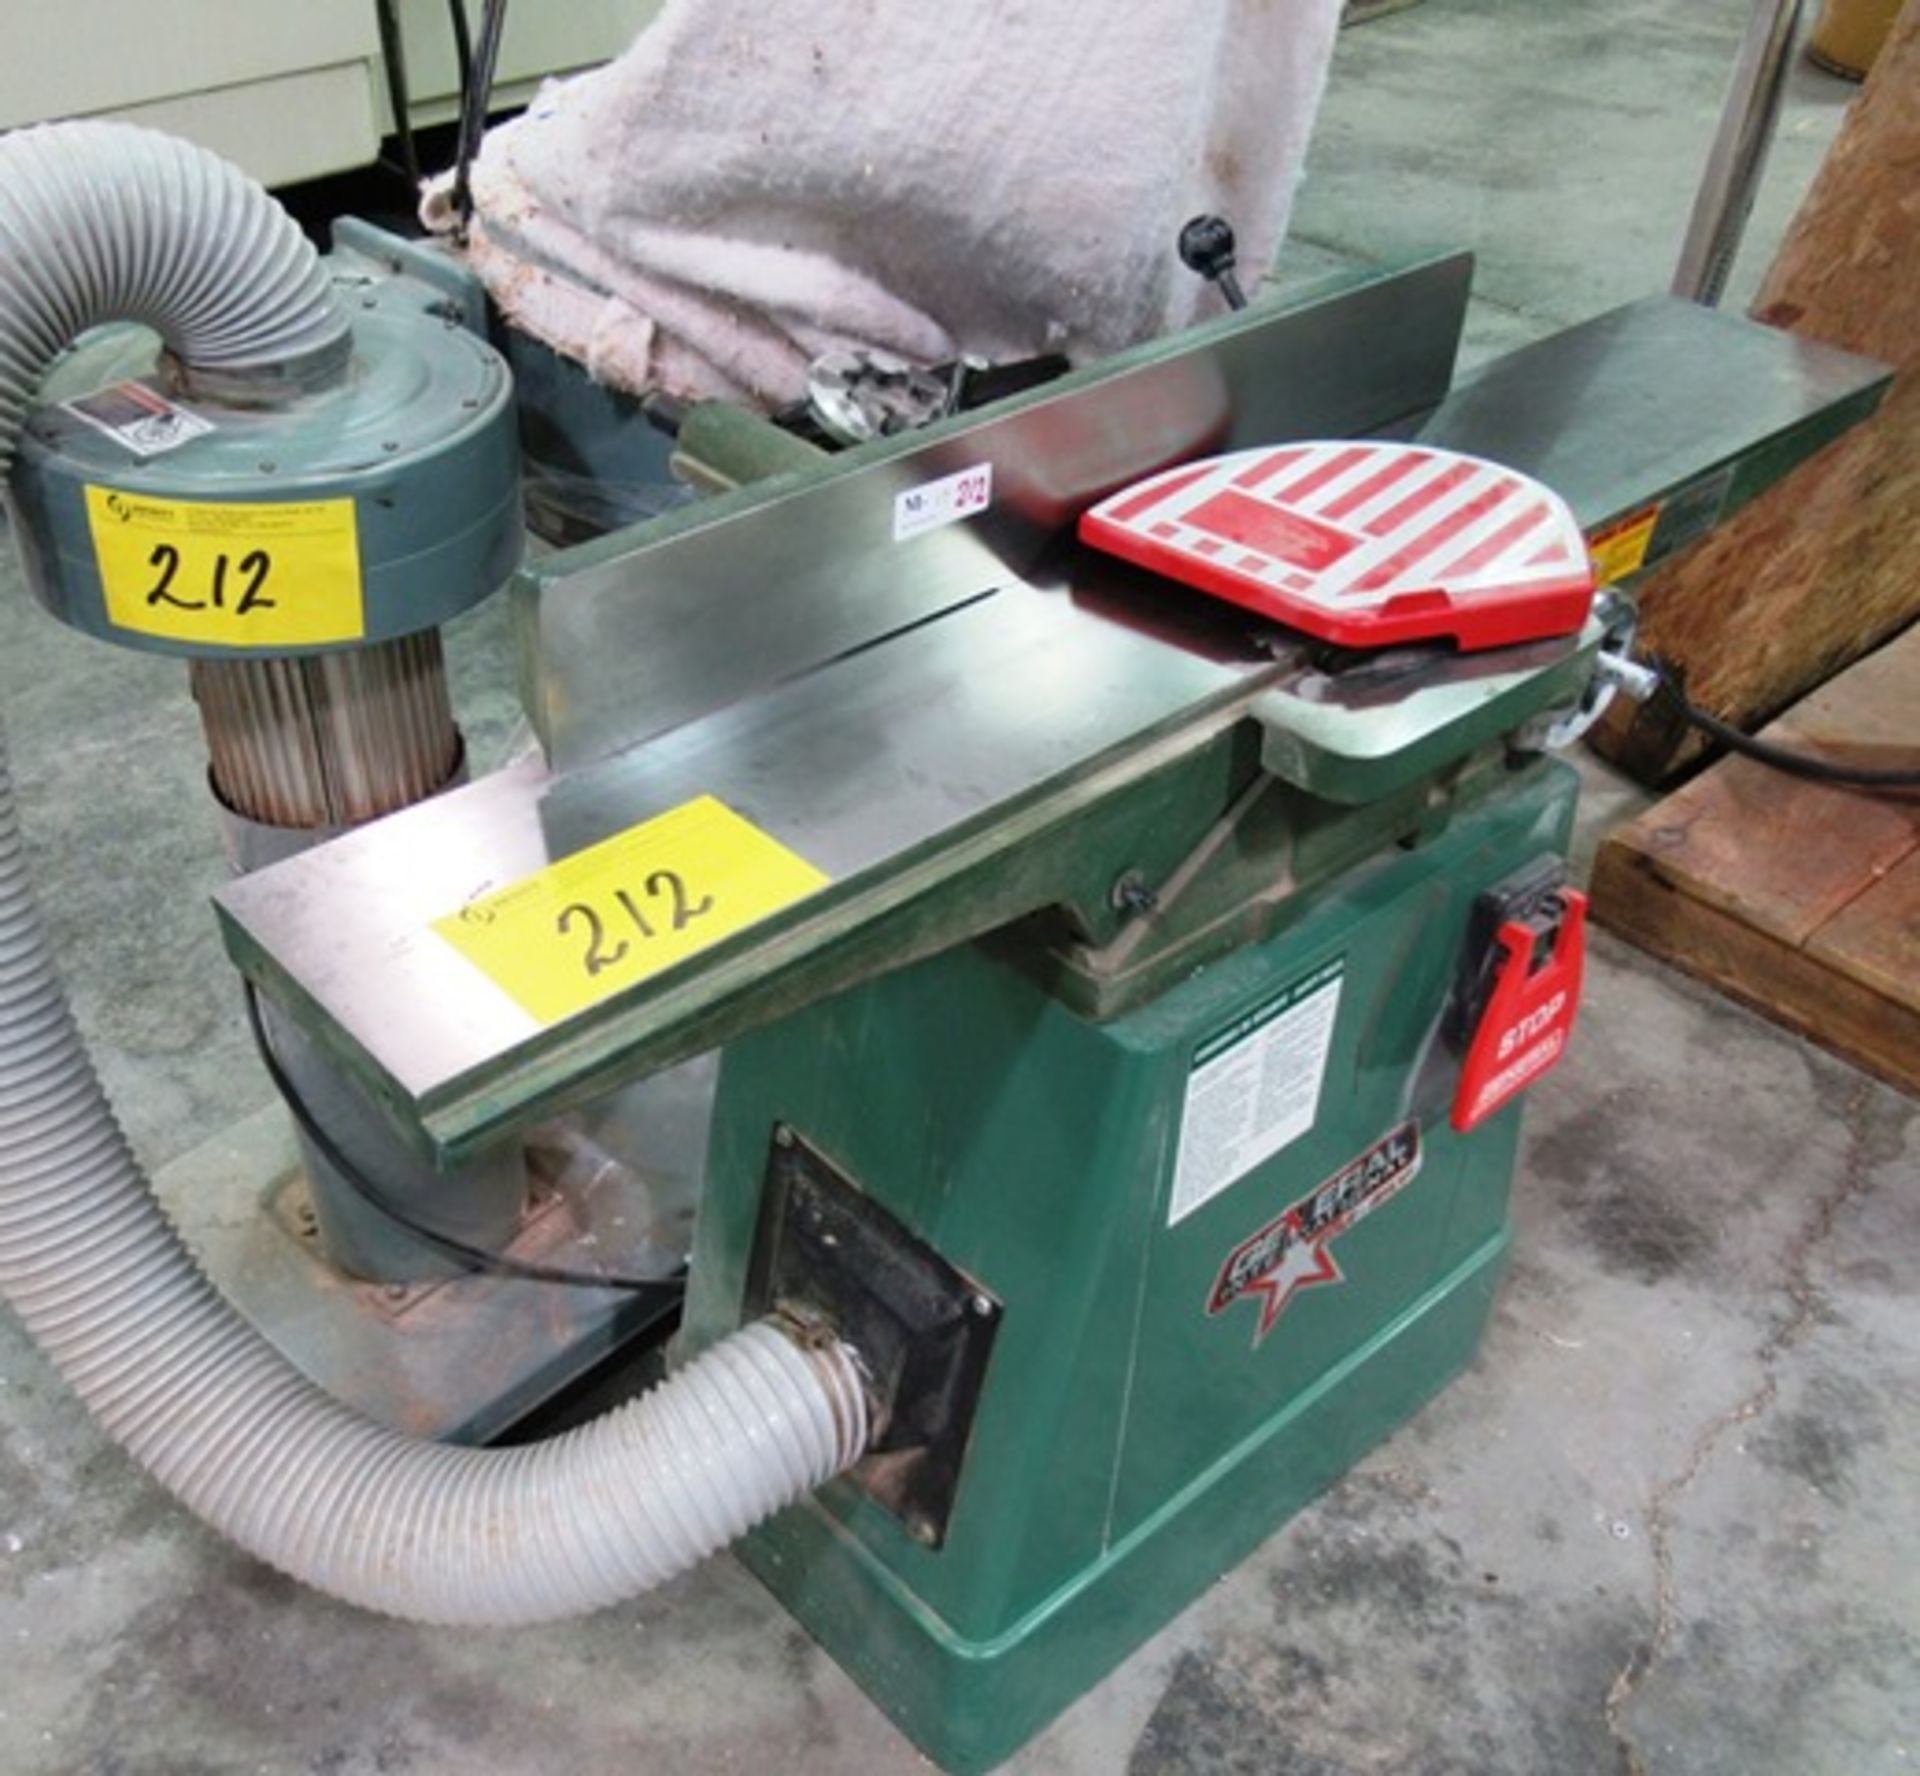 GENERAL 6" JOINTER C/W DELTA PORTABLE DUST COLLECTOR